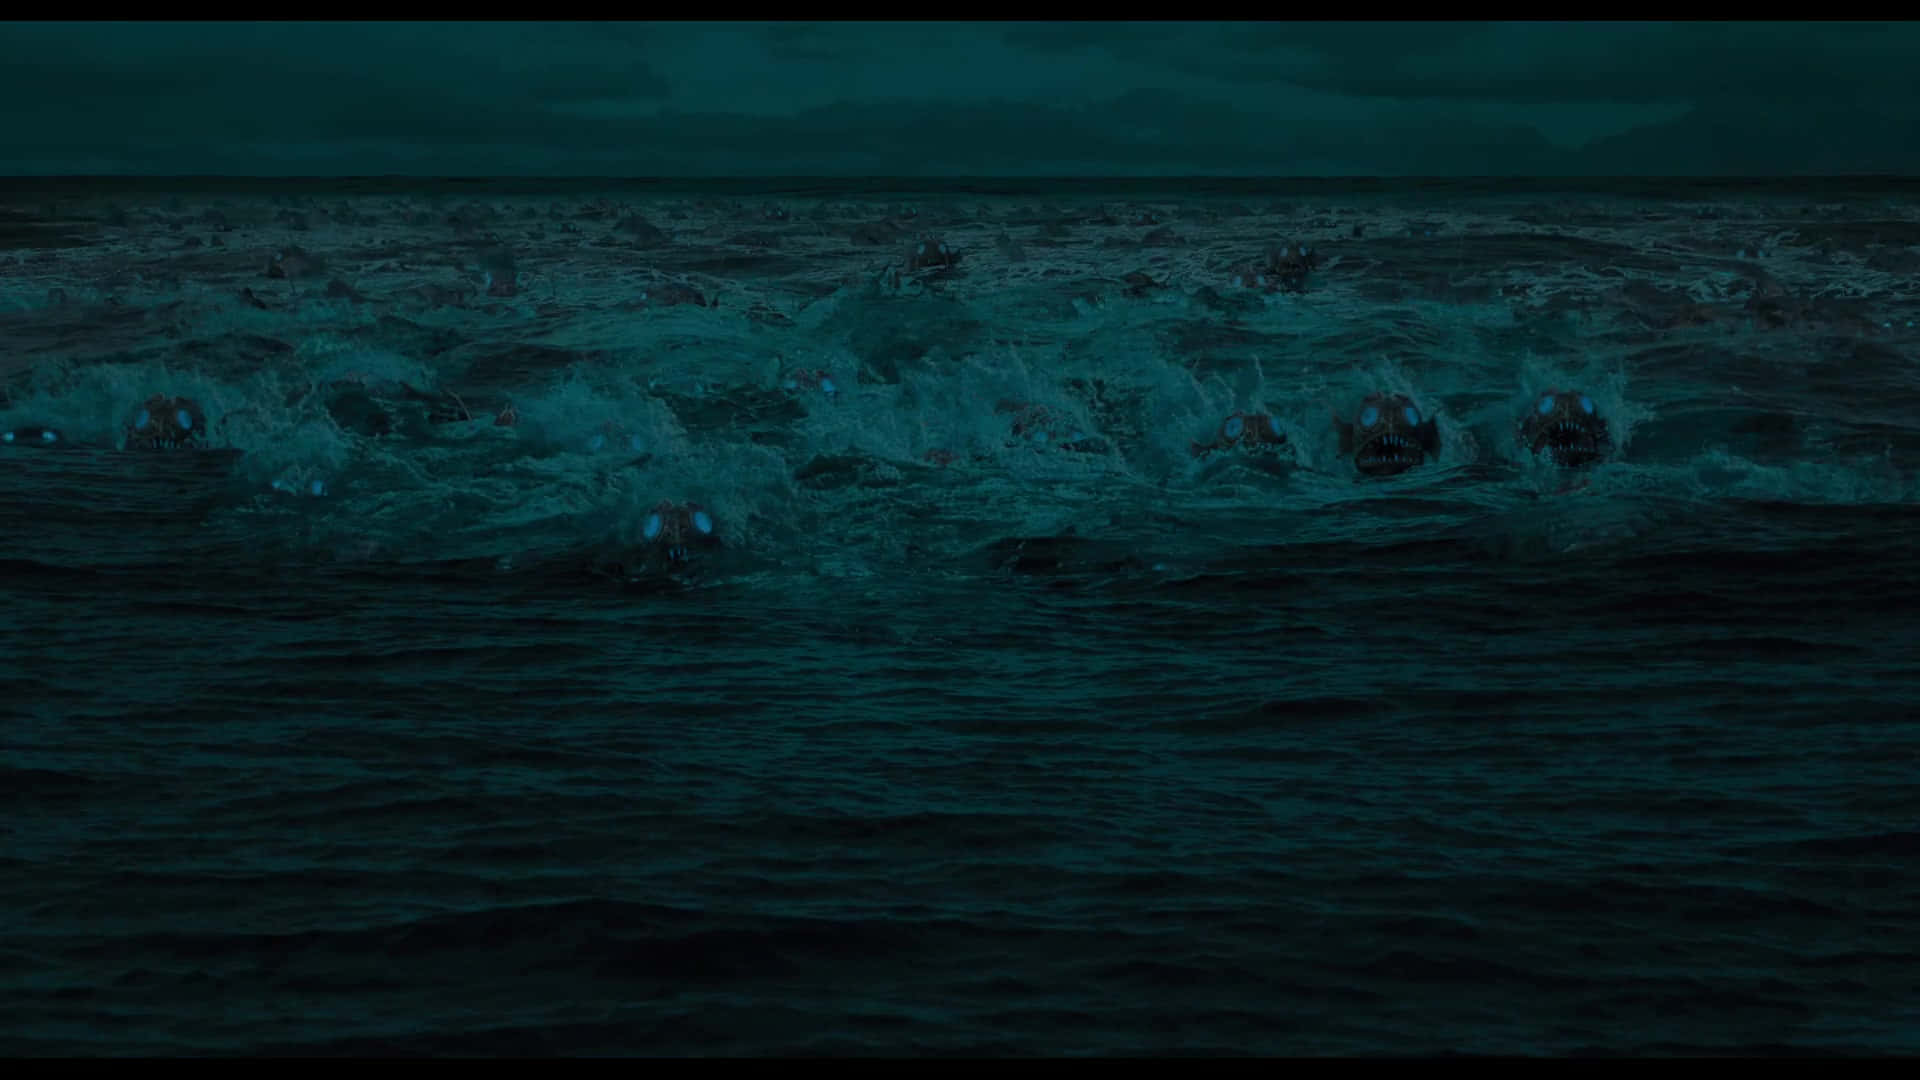 A Group Of People In The Ocean With A Dark Background